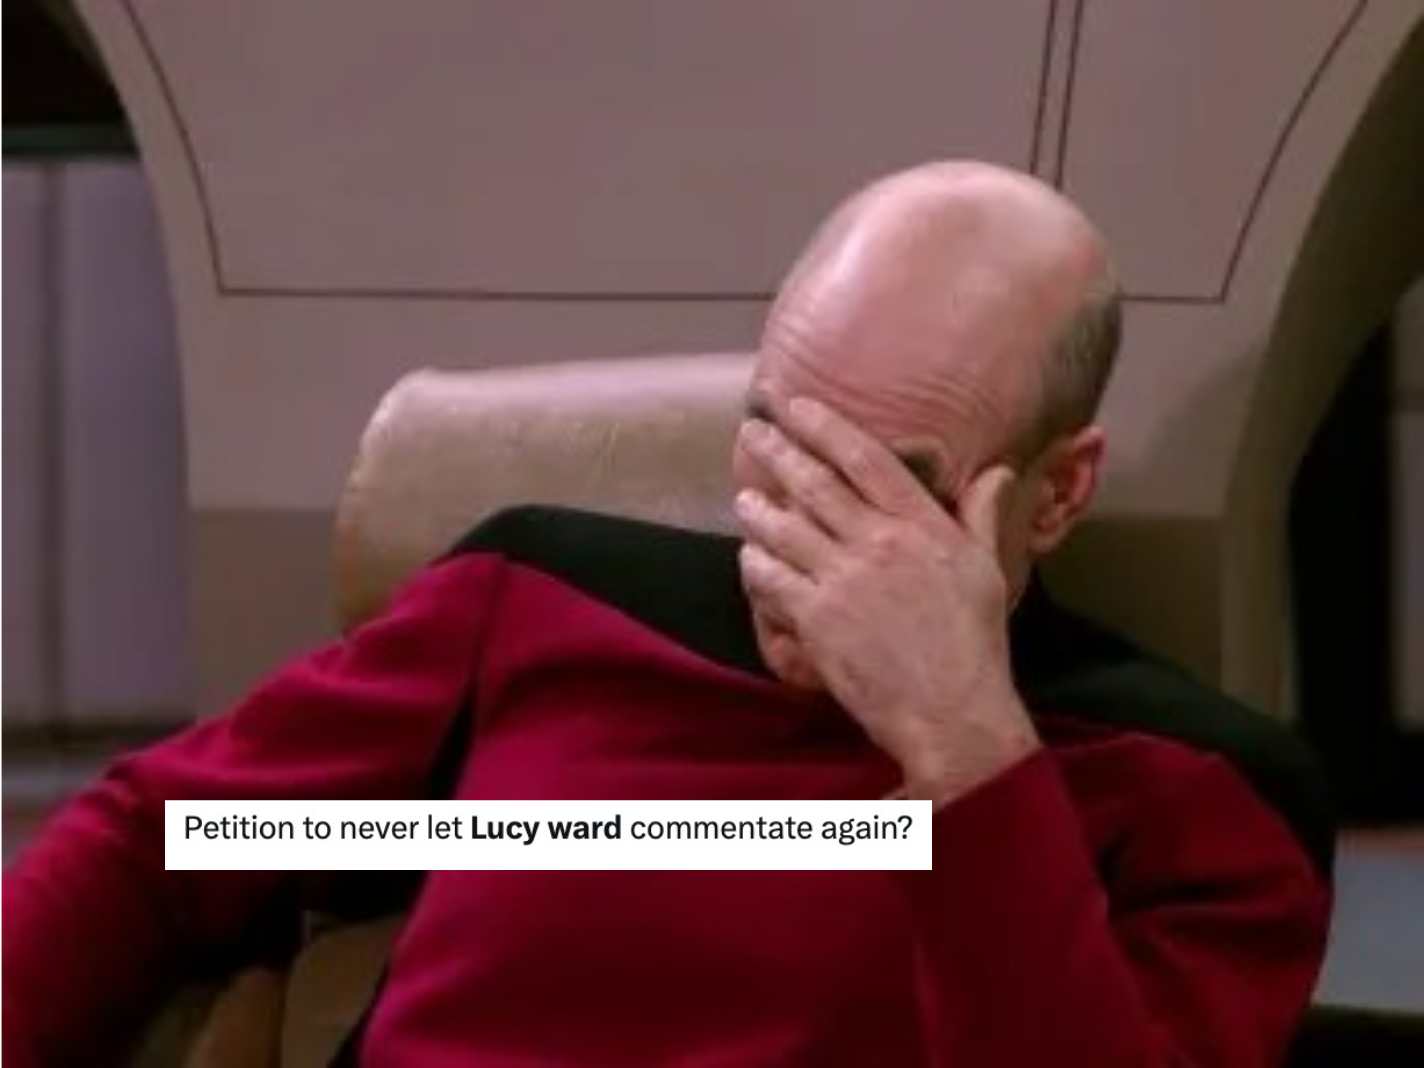 Star Trek facepalm meme to describe Lucy Ward's commentary during Burnley v Liverpool on Amazon Prime